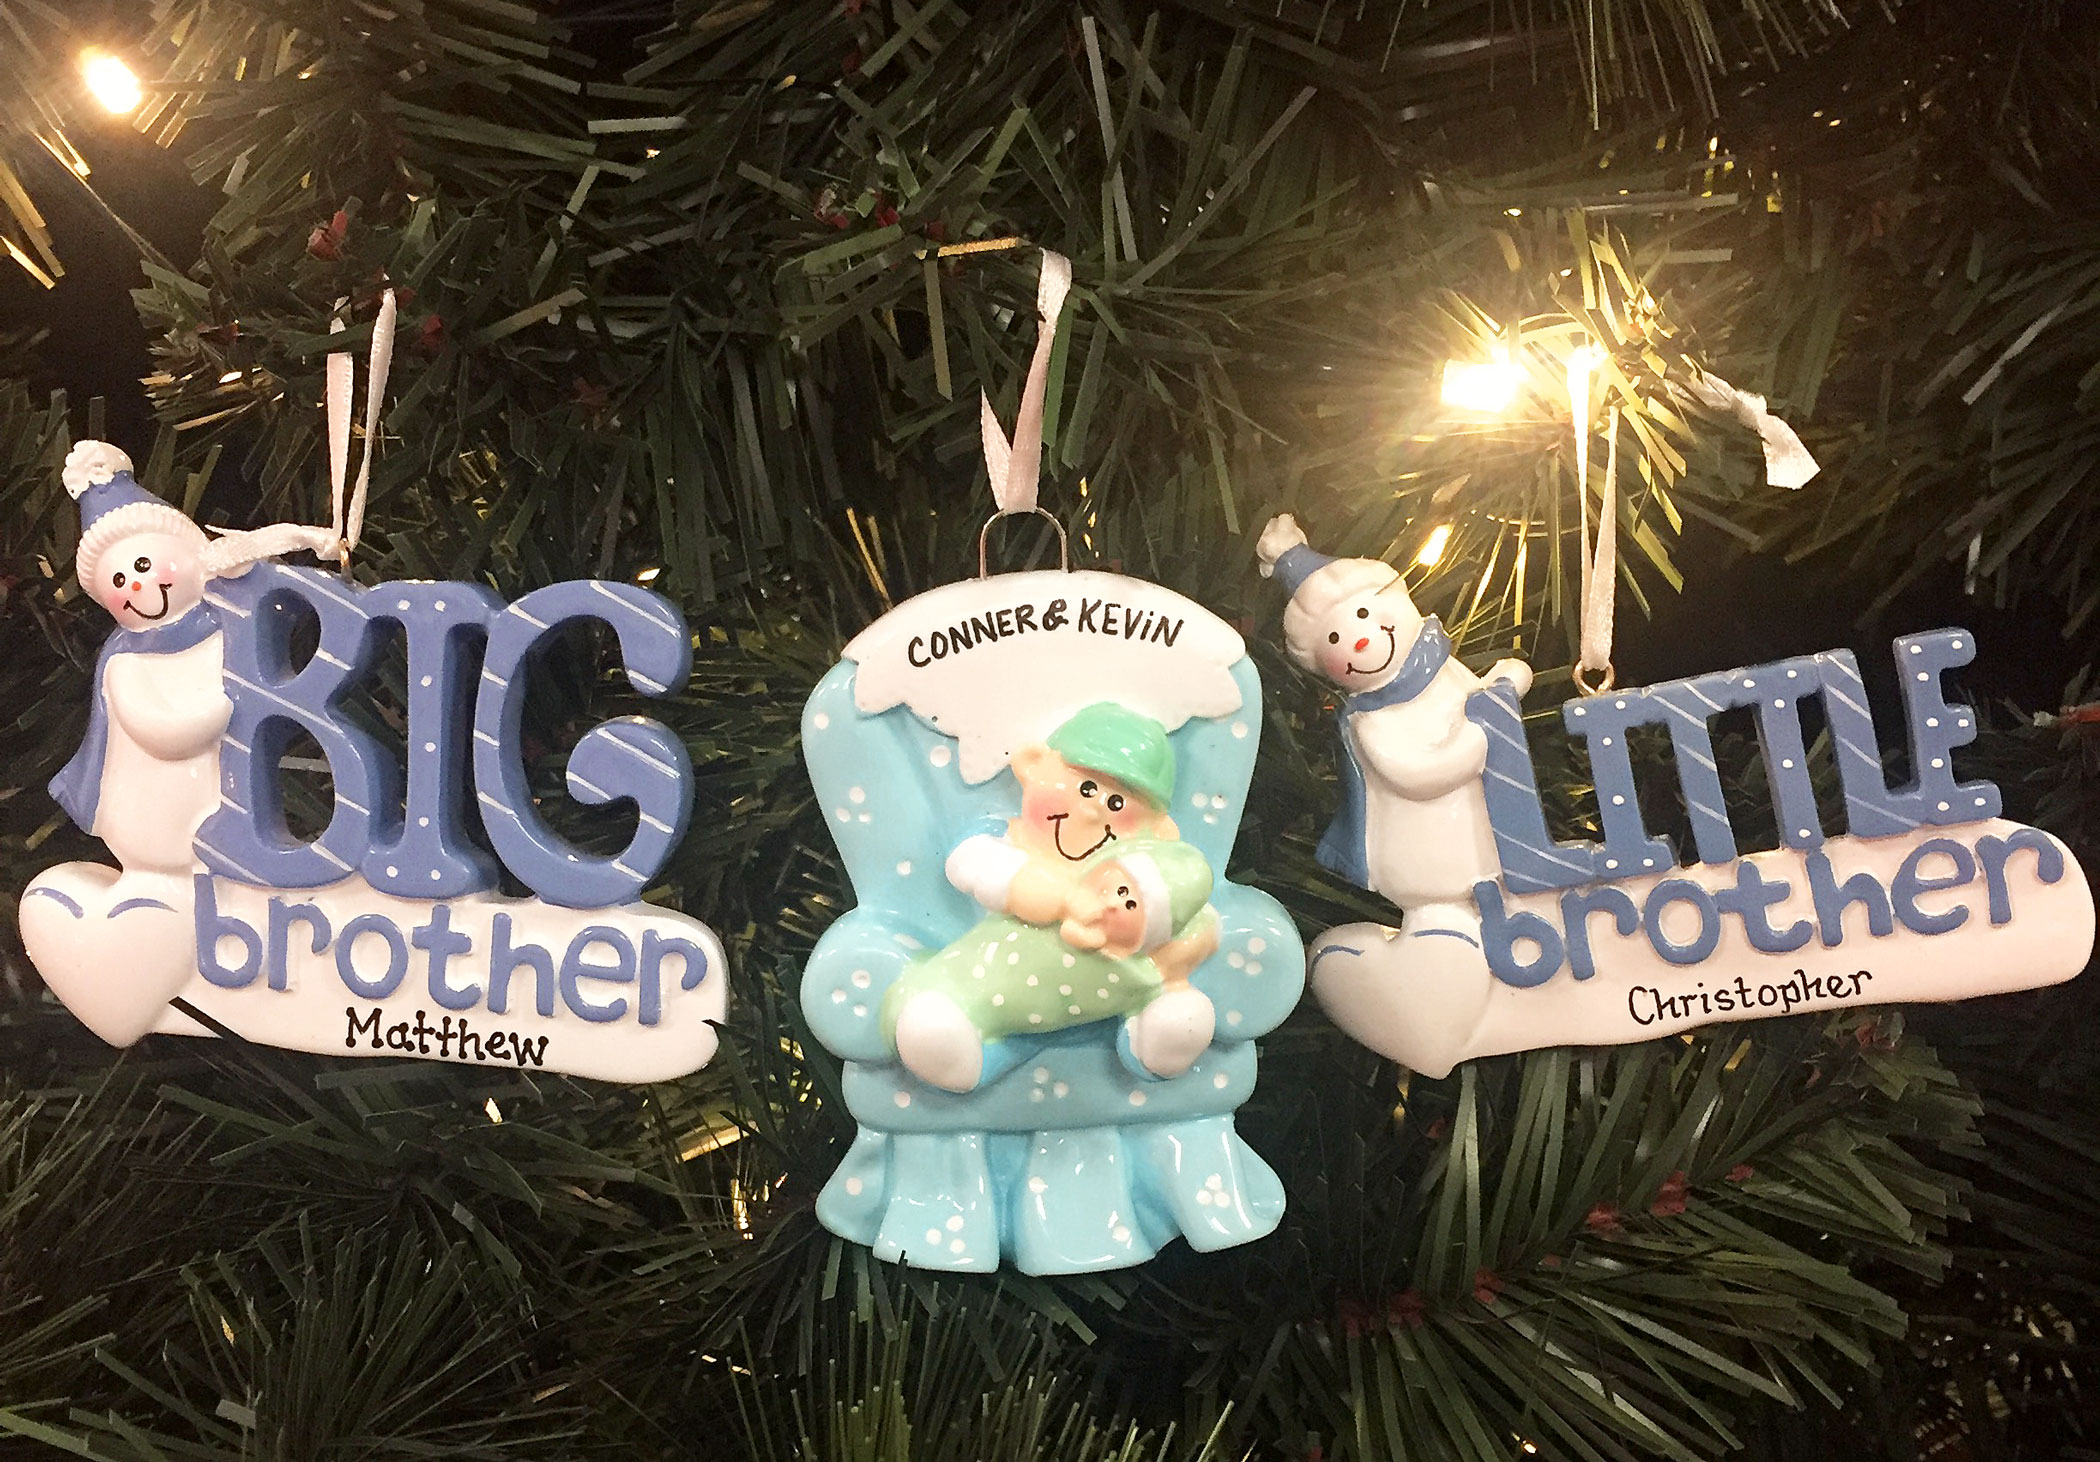 Two snowman ornaments for a big brother and little brother, and an ornament with a big brother holding his younger sibling in a green arm chair | OrnamentShop.com